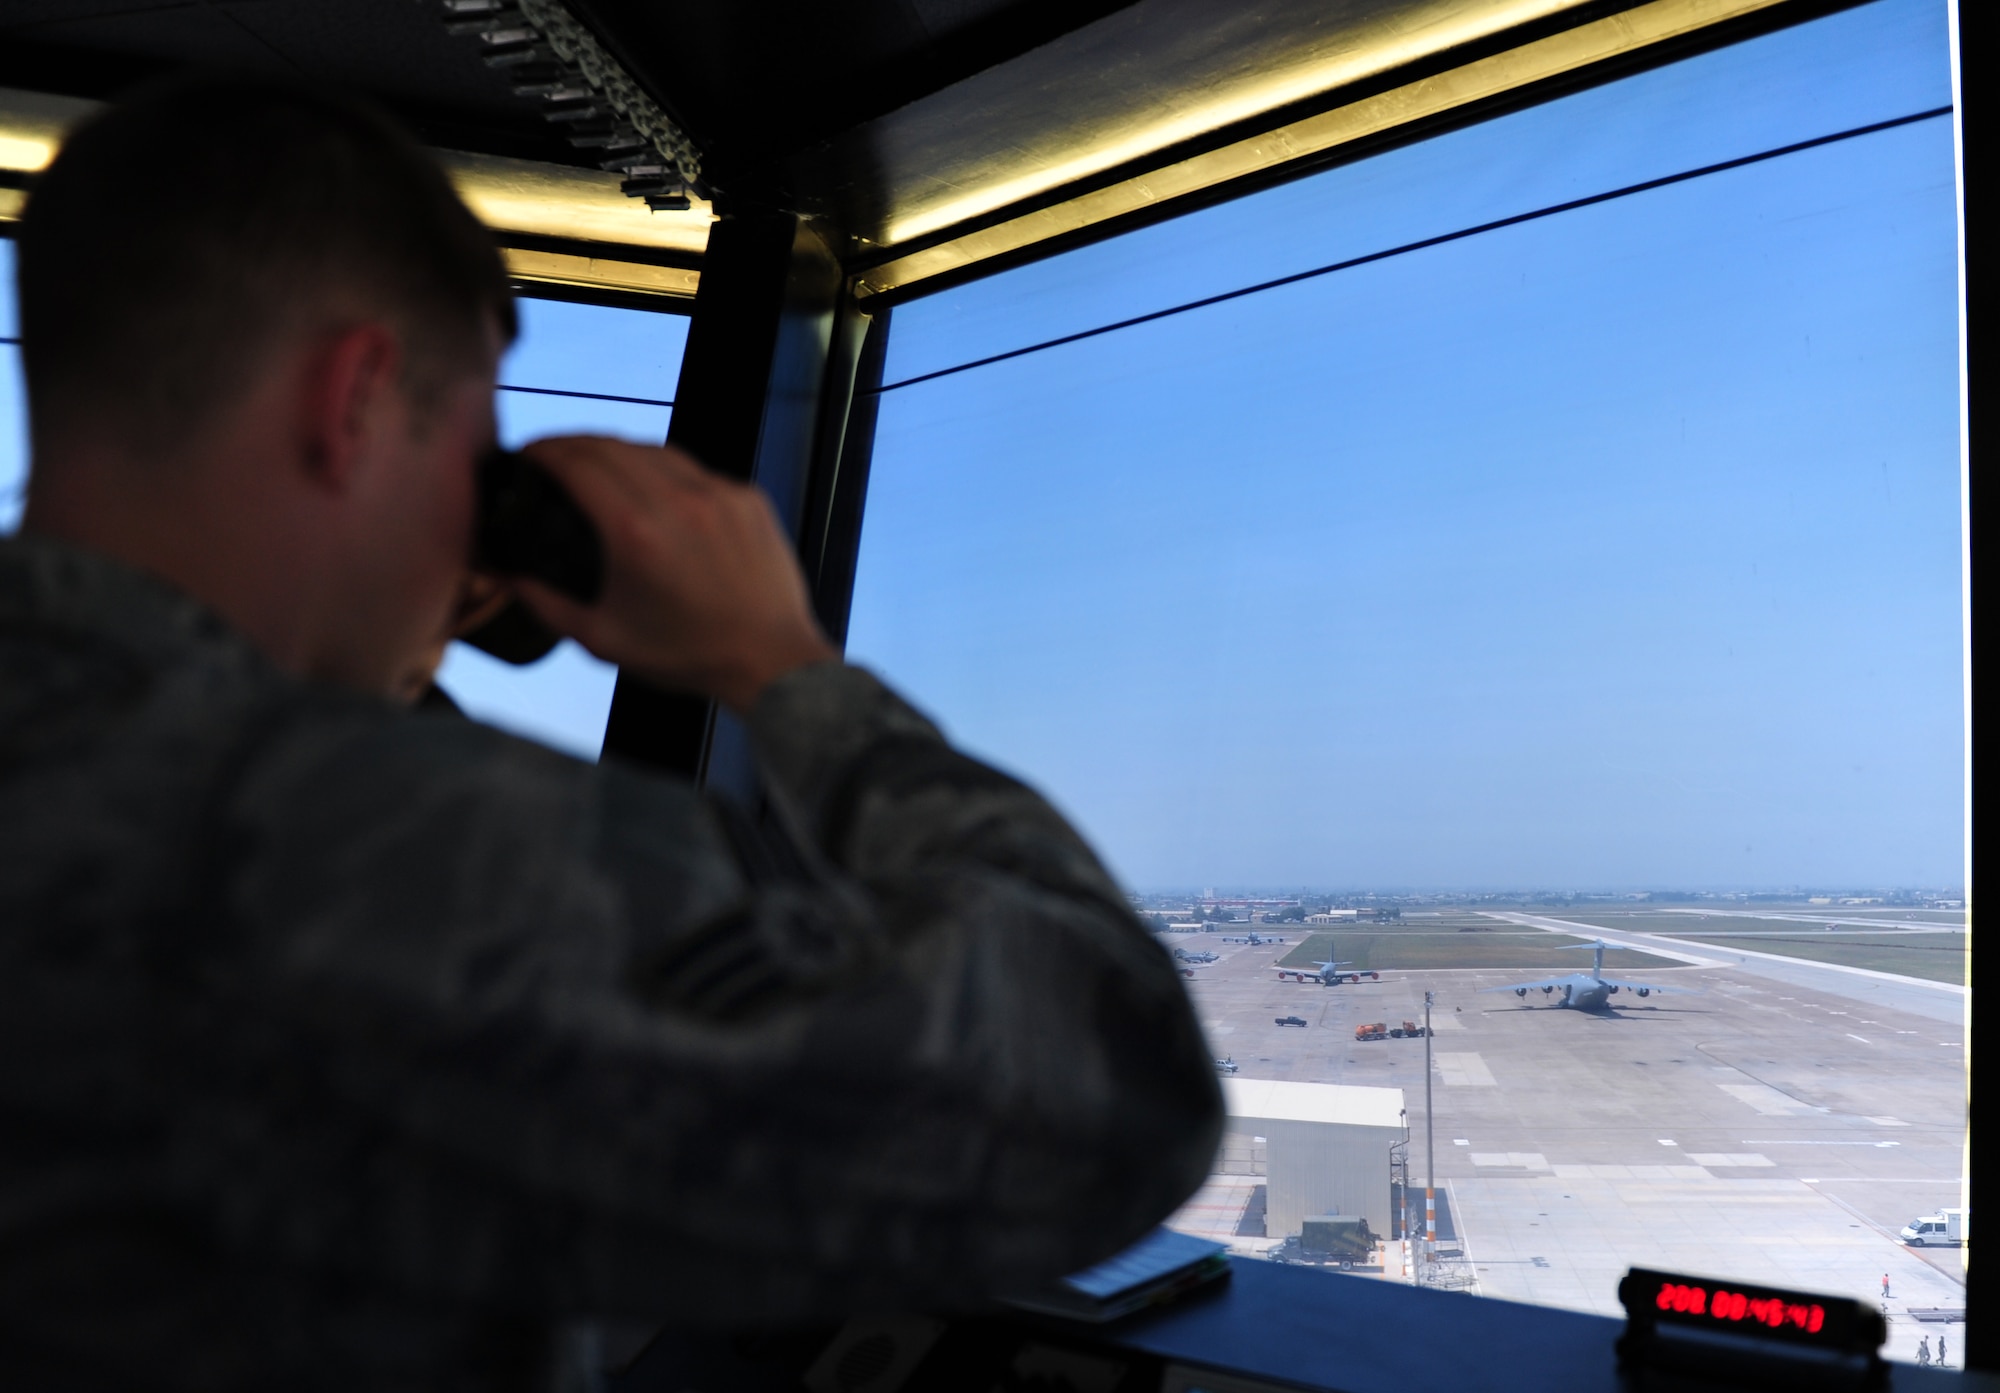 Senior Airman Matthew Thornton, 39th Operations Squadron air traffic control journeyman, watches a C-17 Globemaster III aircraft taxi before take off July 27, 2011, at Incirlik Air Base, Turkey. Air traffic controllers here run about 25,000 operations a year. (U.S. Air Force photo by Senior Airman Anthony Sanchelli/Released)